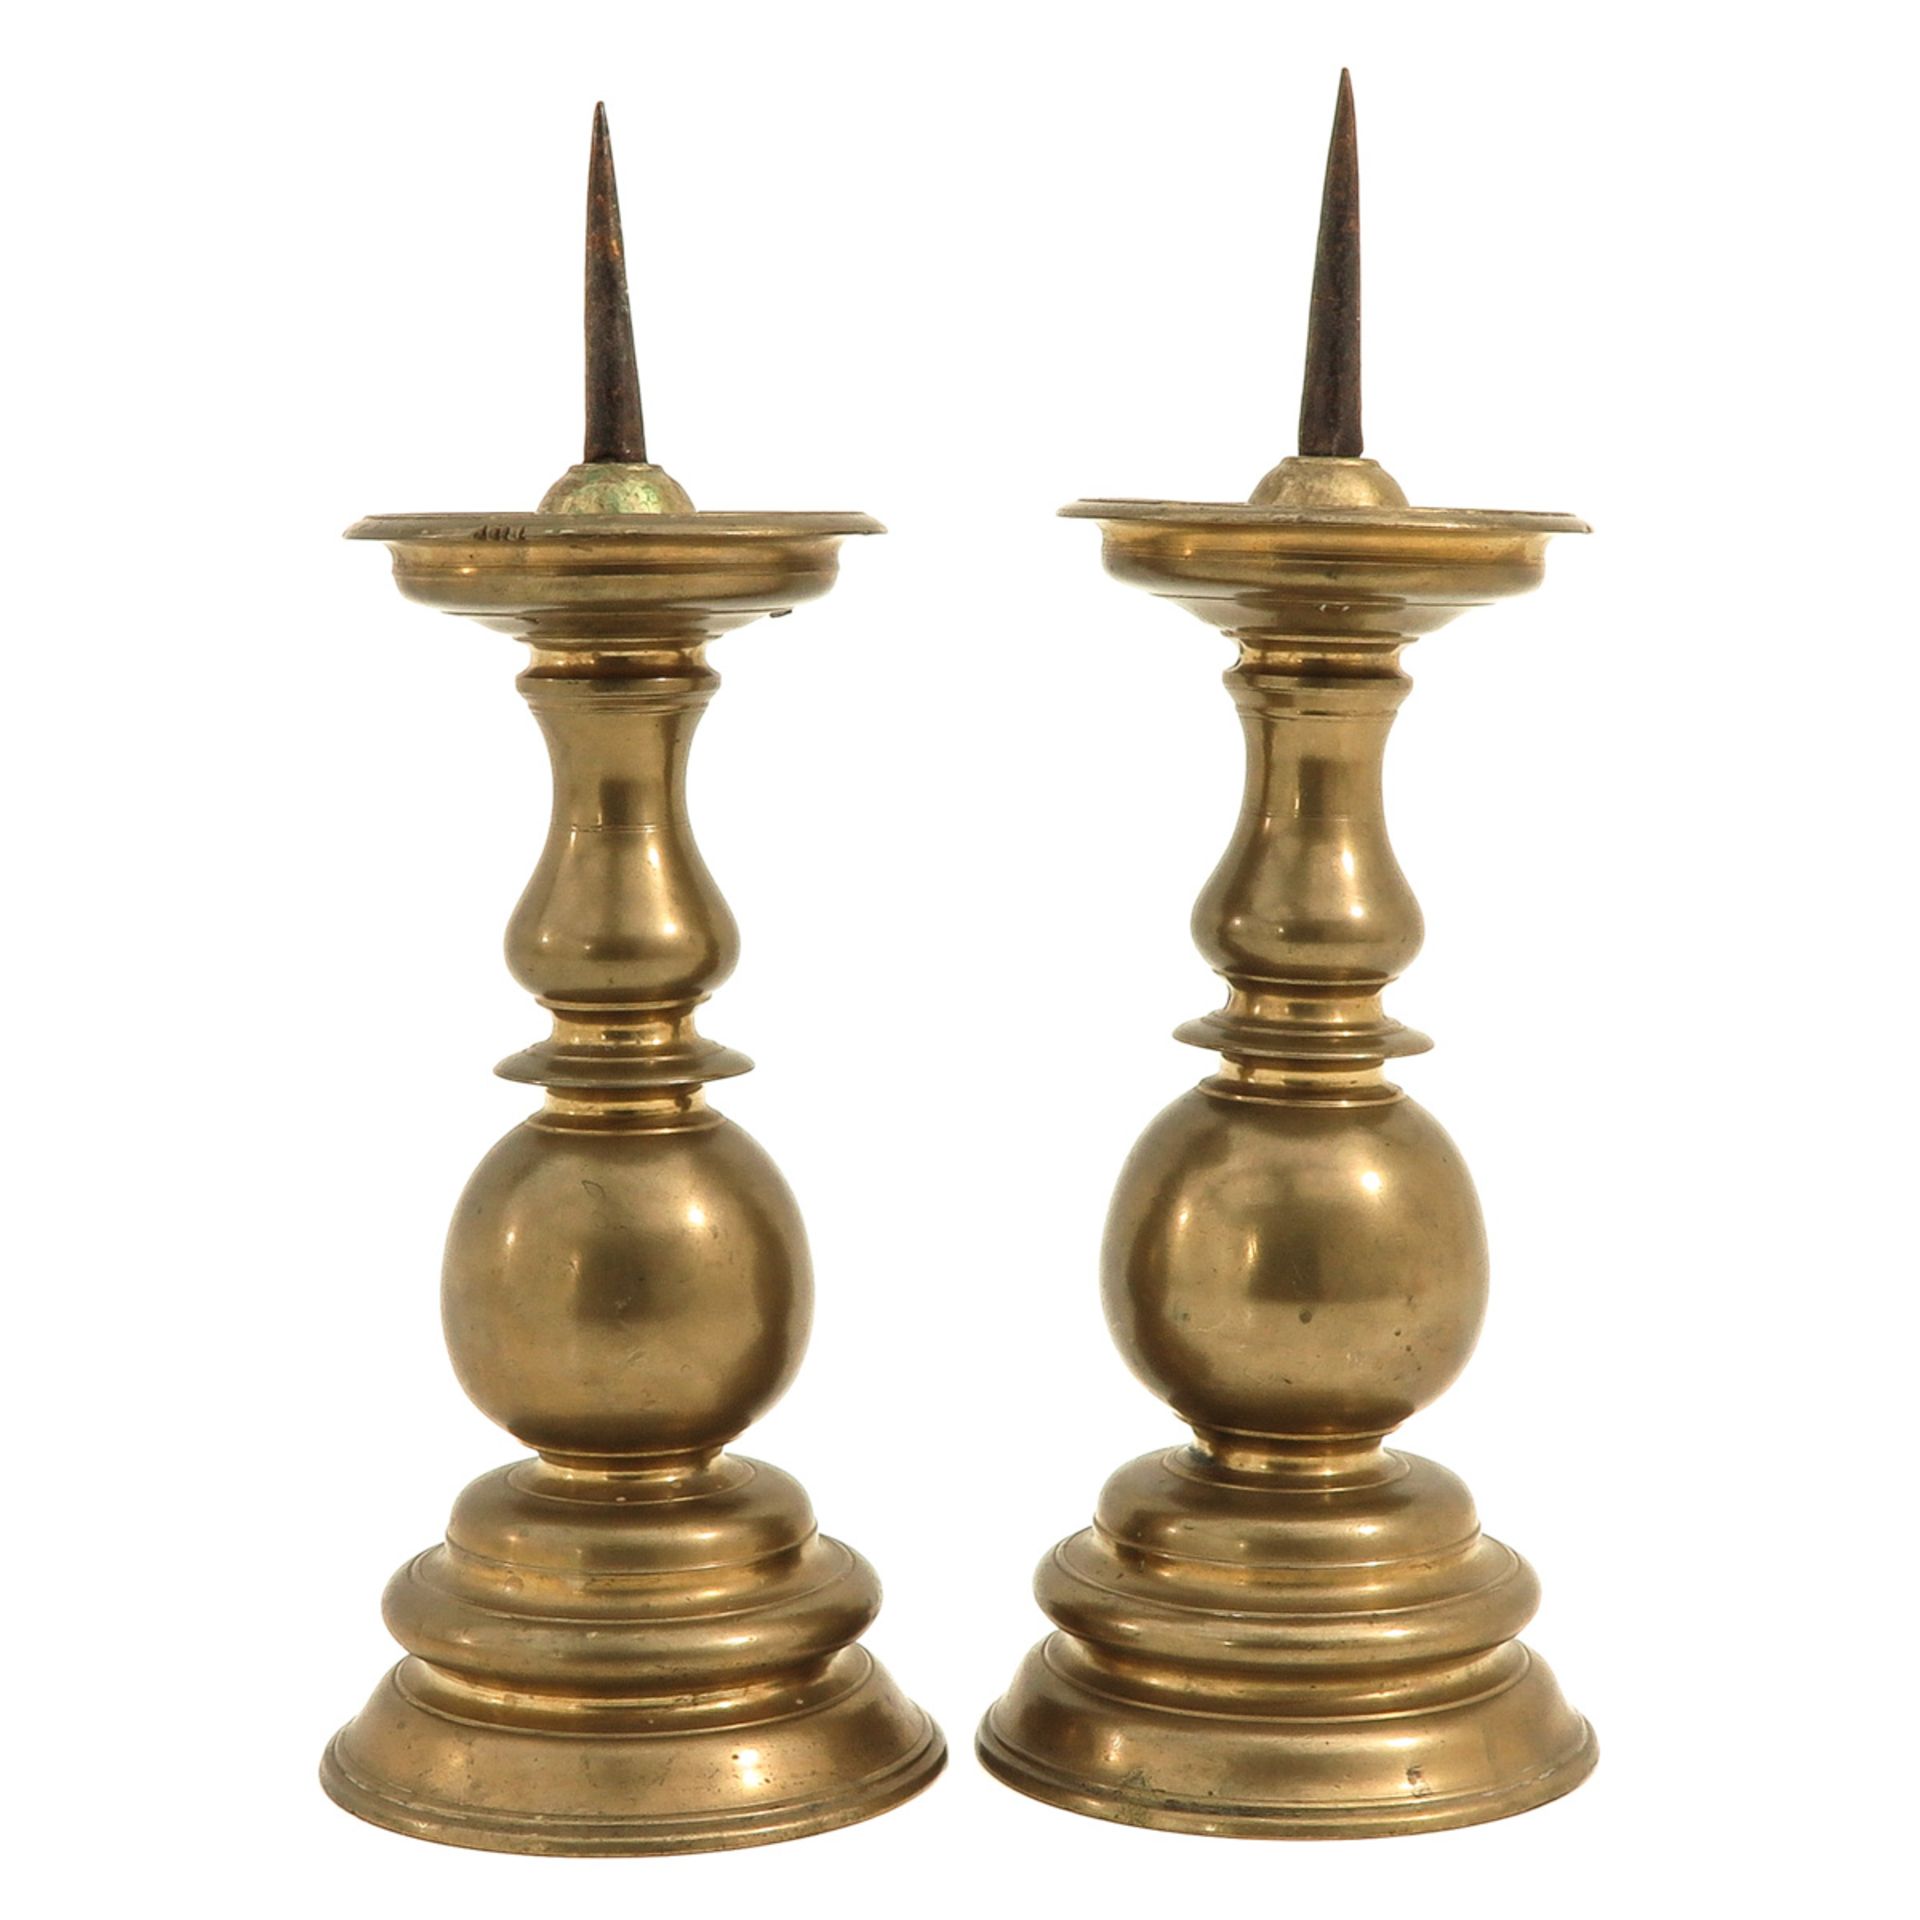 A Pair of 16th Century Candlesticks - Image 4 of 8